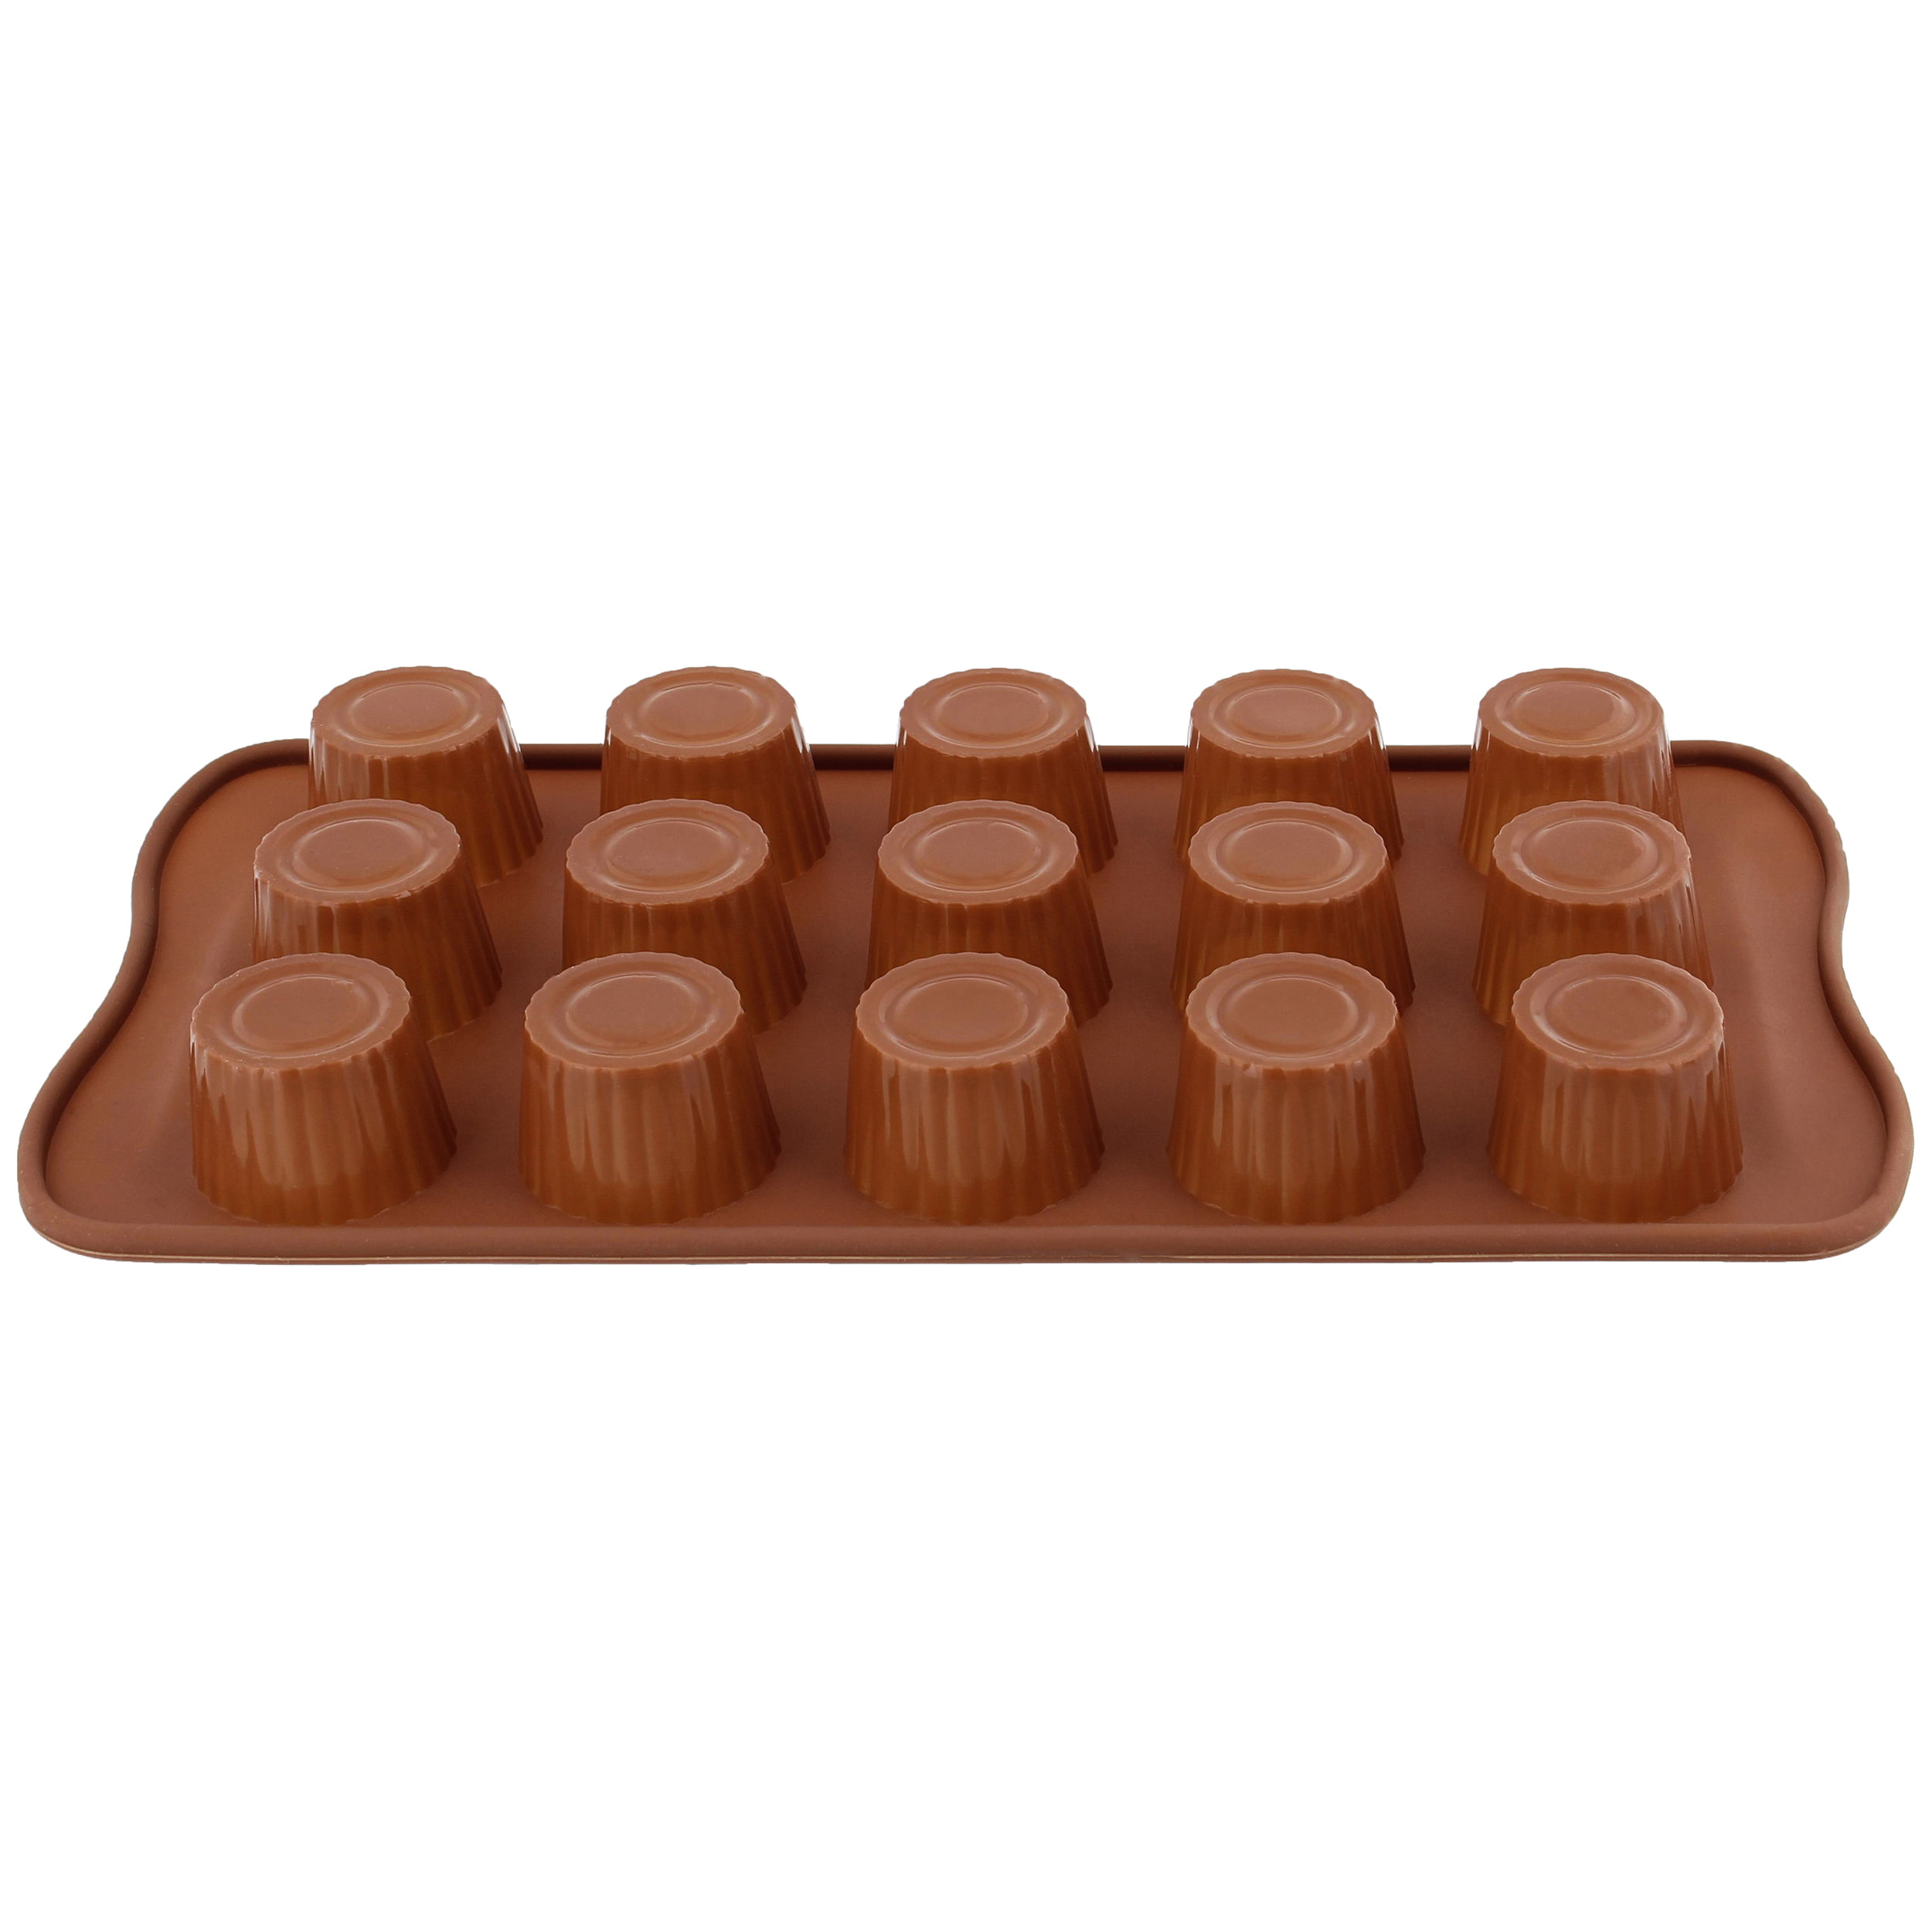  SiliFine Cake Puck Mold Set Different Sizes 12 Cavity Chocolate  Silicone Mold with Tray, Silicone Spatula, Piping Bag, Scraper Silicone Cake  Baking Mold for Chocolate Candy Covered Dessert Molds: Home 